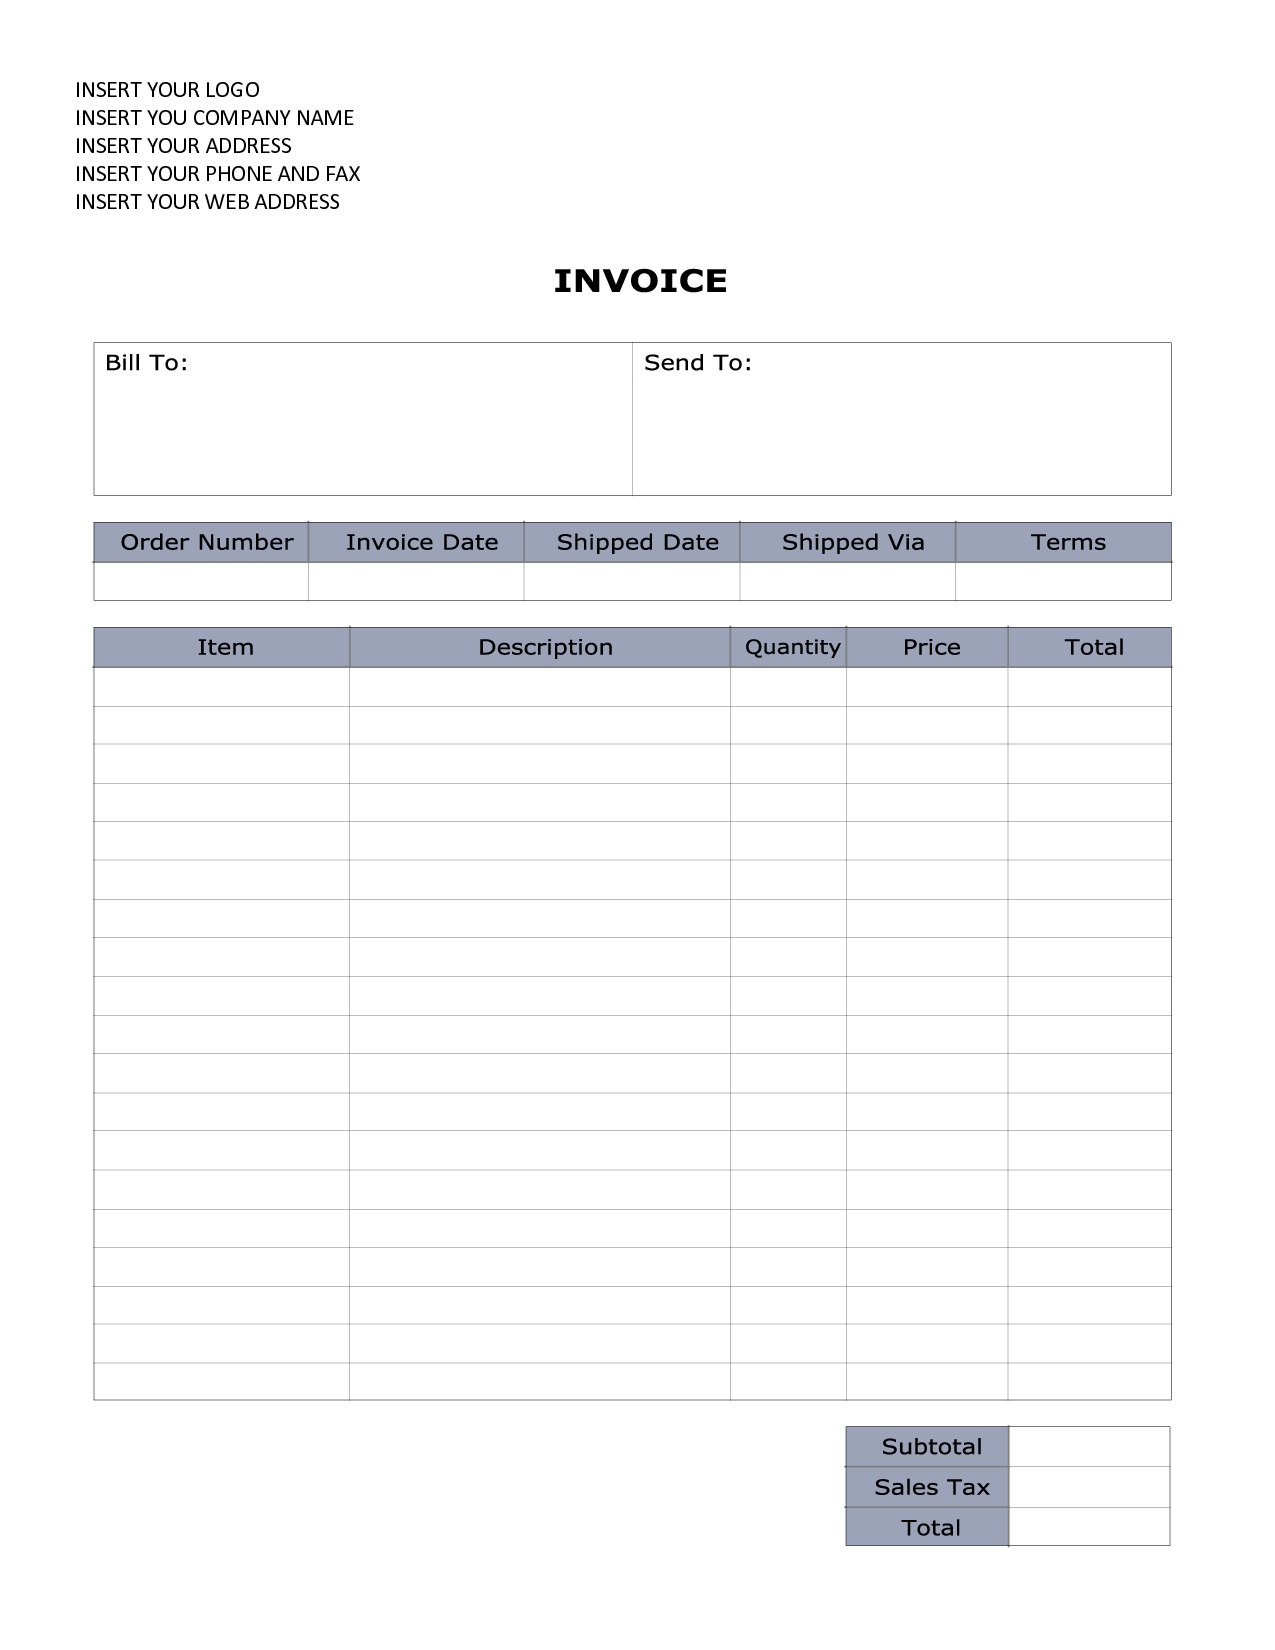 invoice template word doc appointmentlettersinfo business plan invoice samples in word